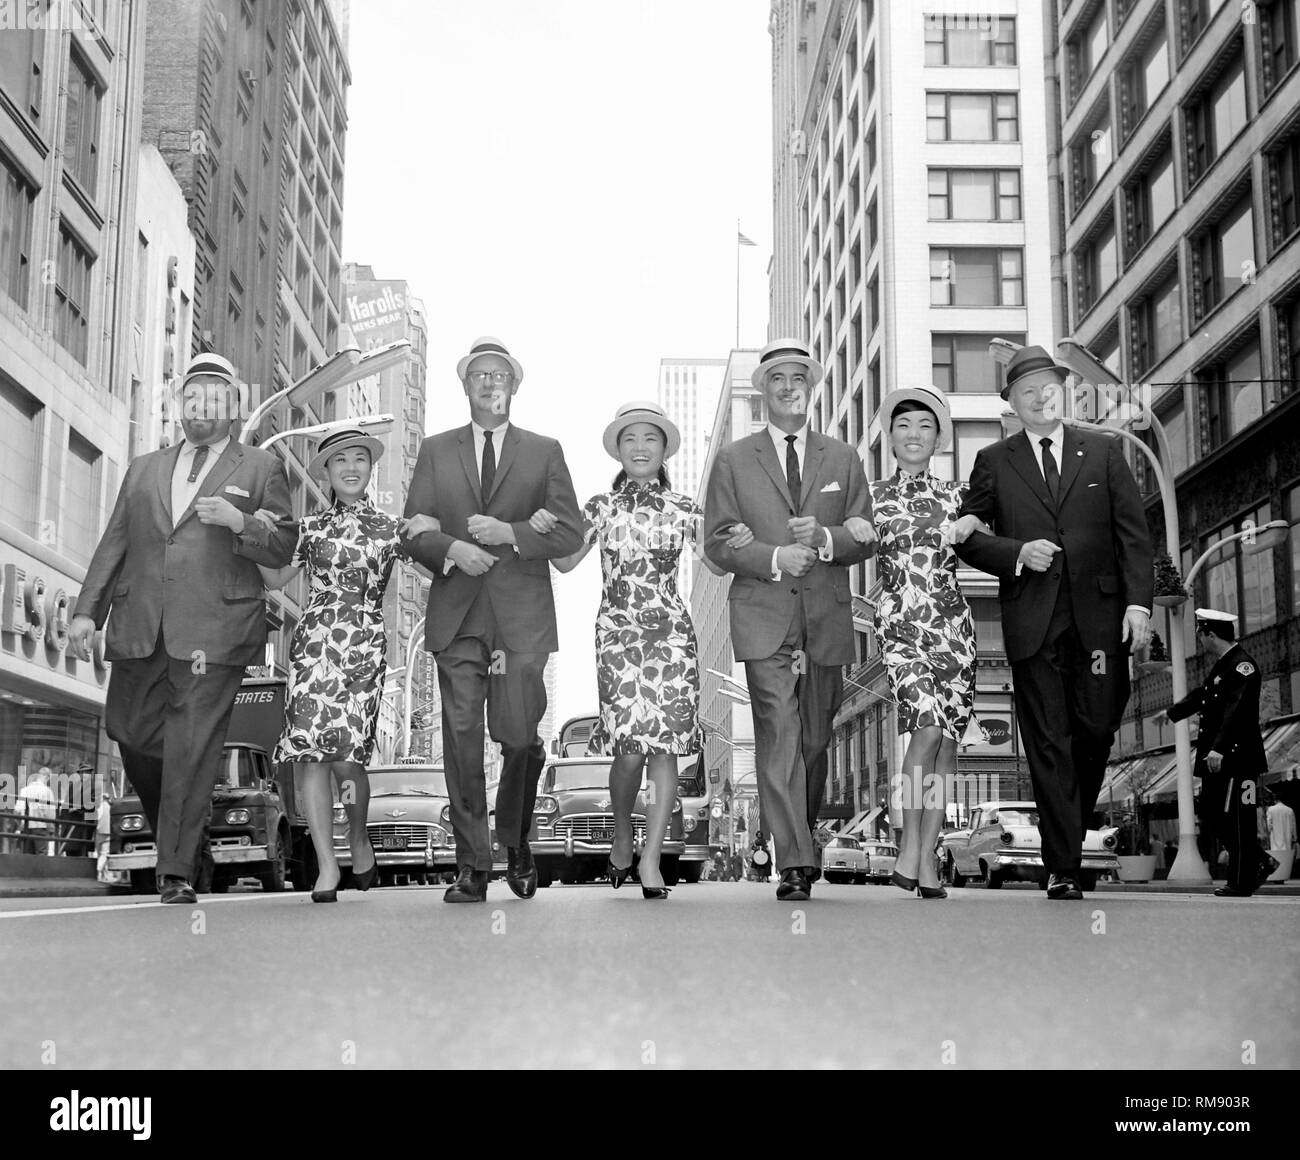 Models walk down State Street in Chicago to promote Straw Hat Day, ca. 1963. Stock Photo